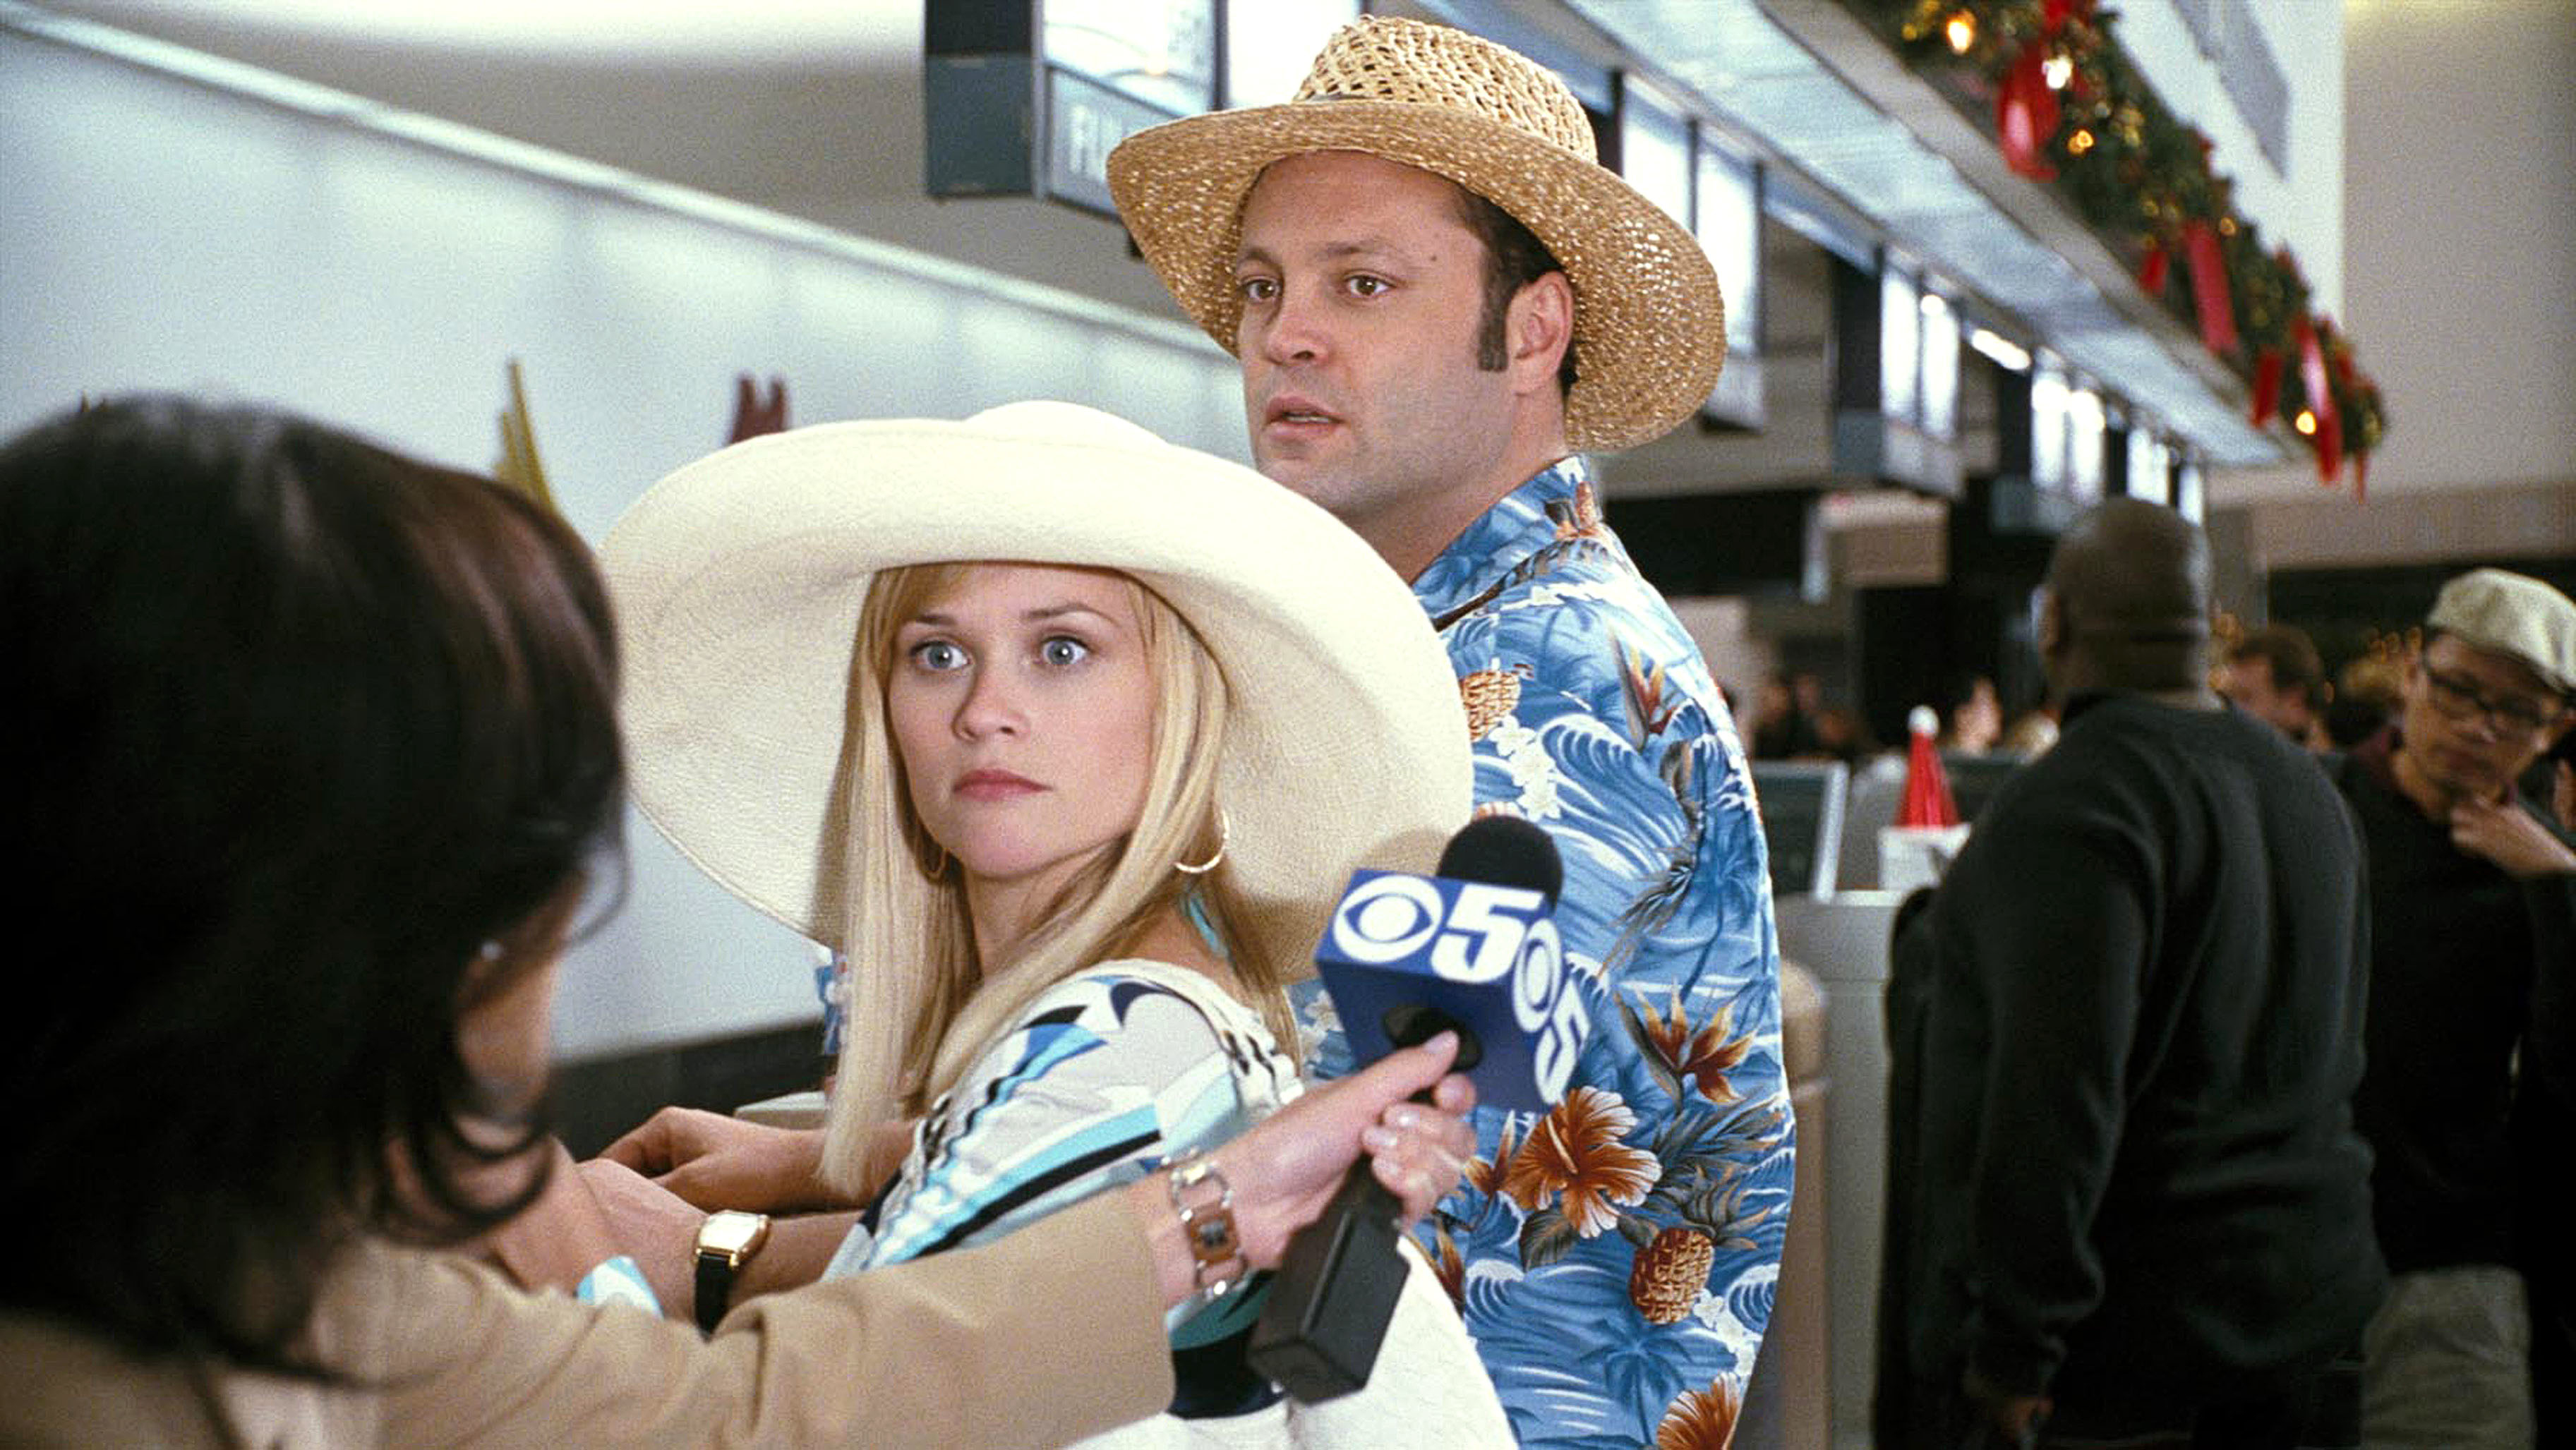 reese witherspoon and vince vaughn wearing sun hats and hawaiian shirts, being interviewed by the news at the airport